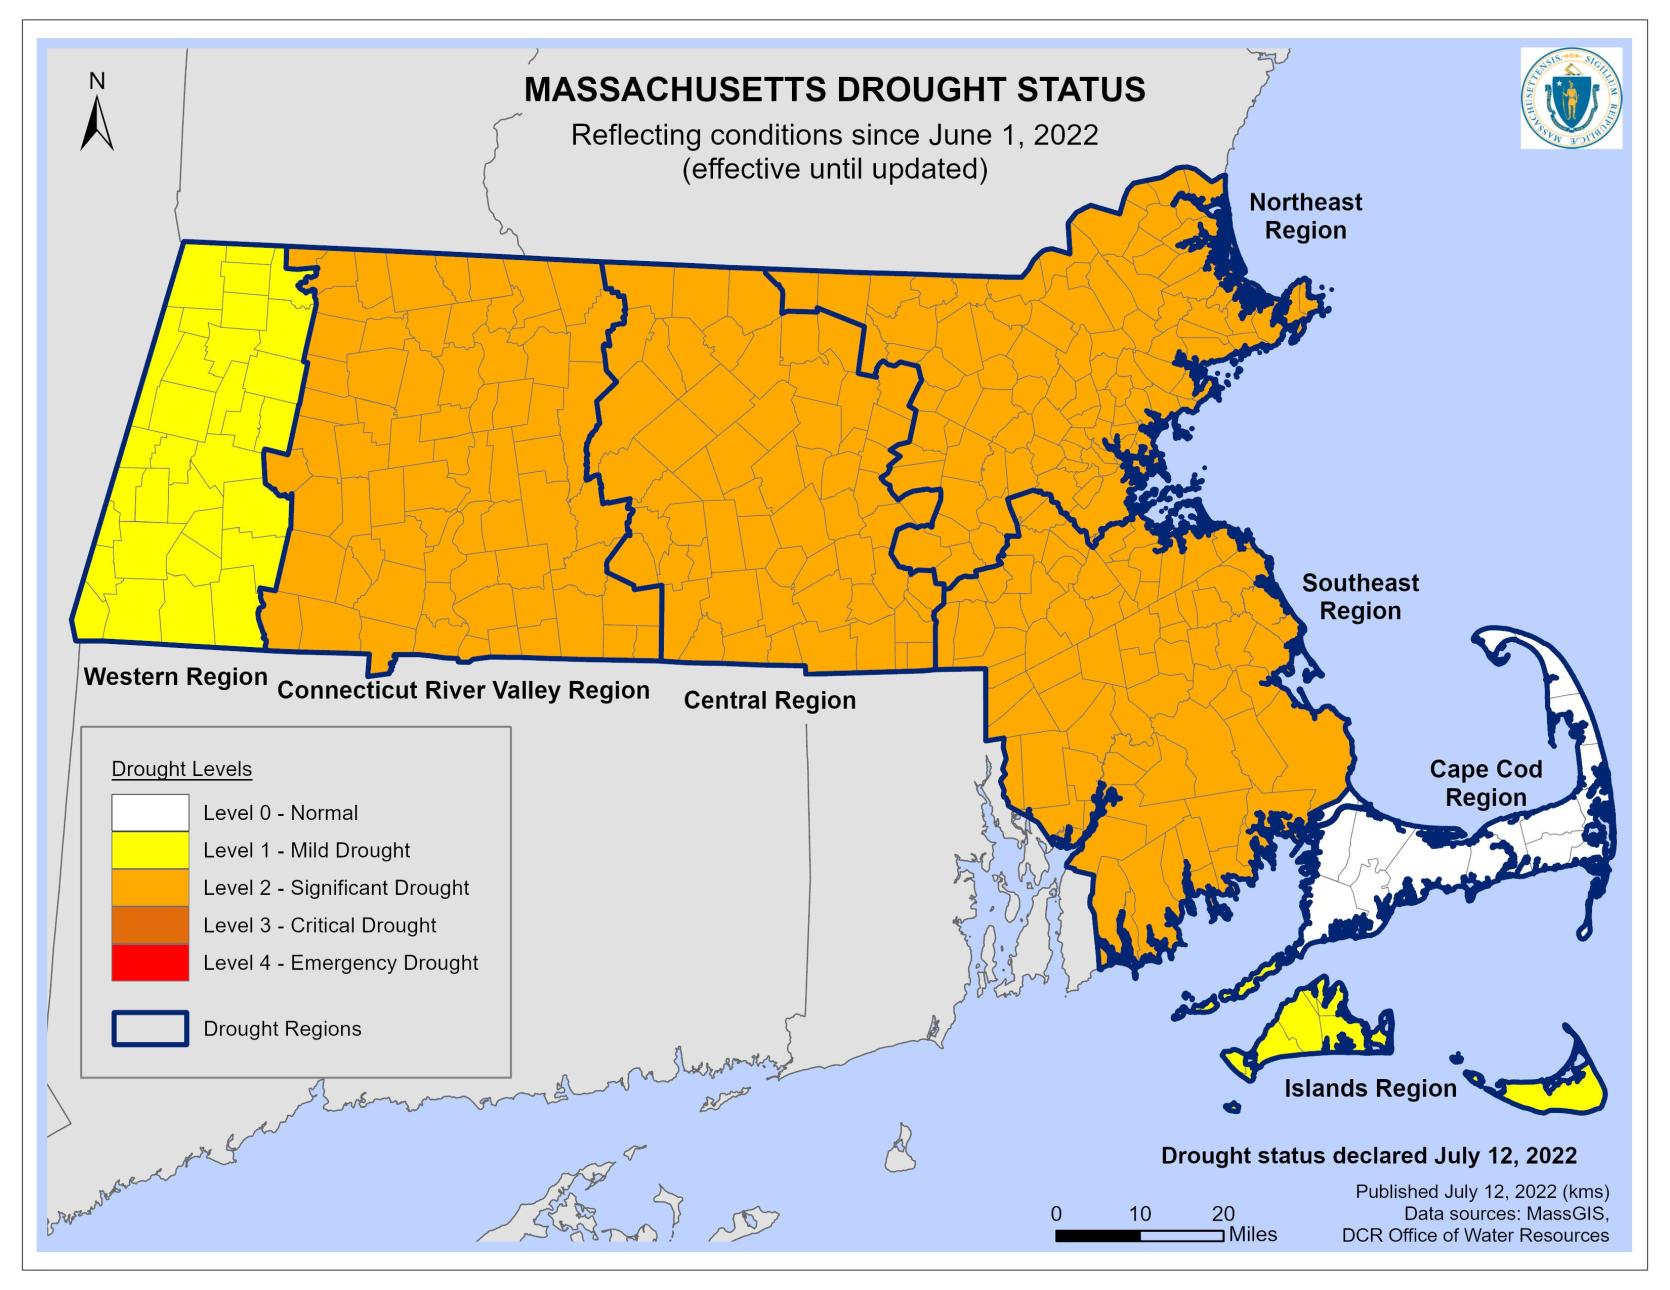 Drought Status Map as of July 12, 2022